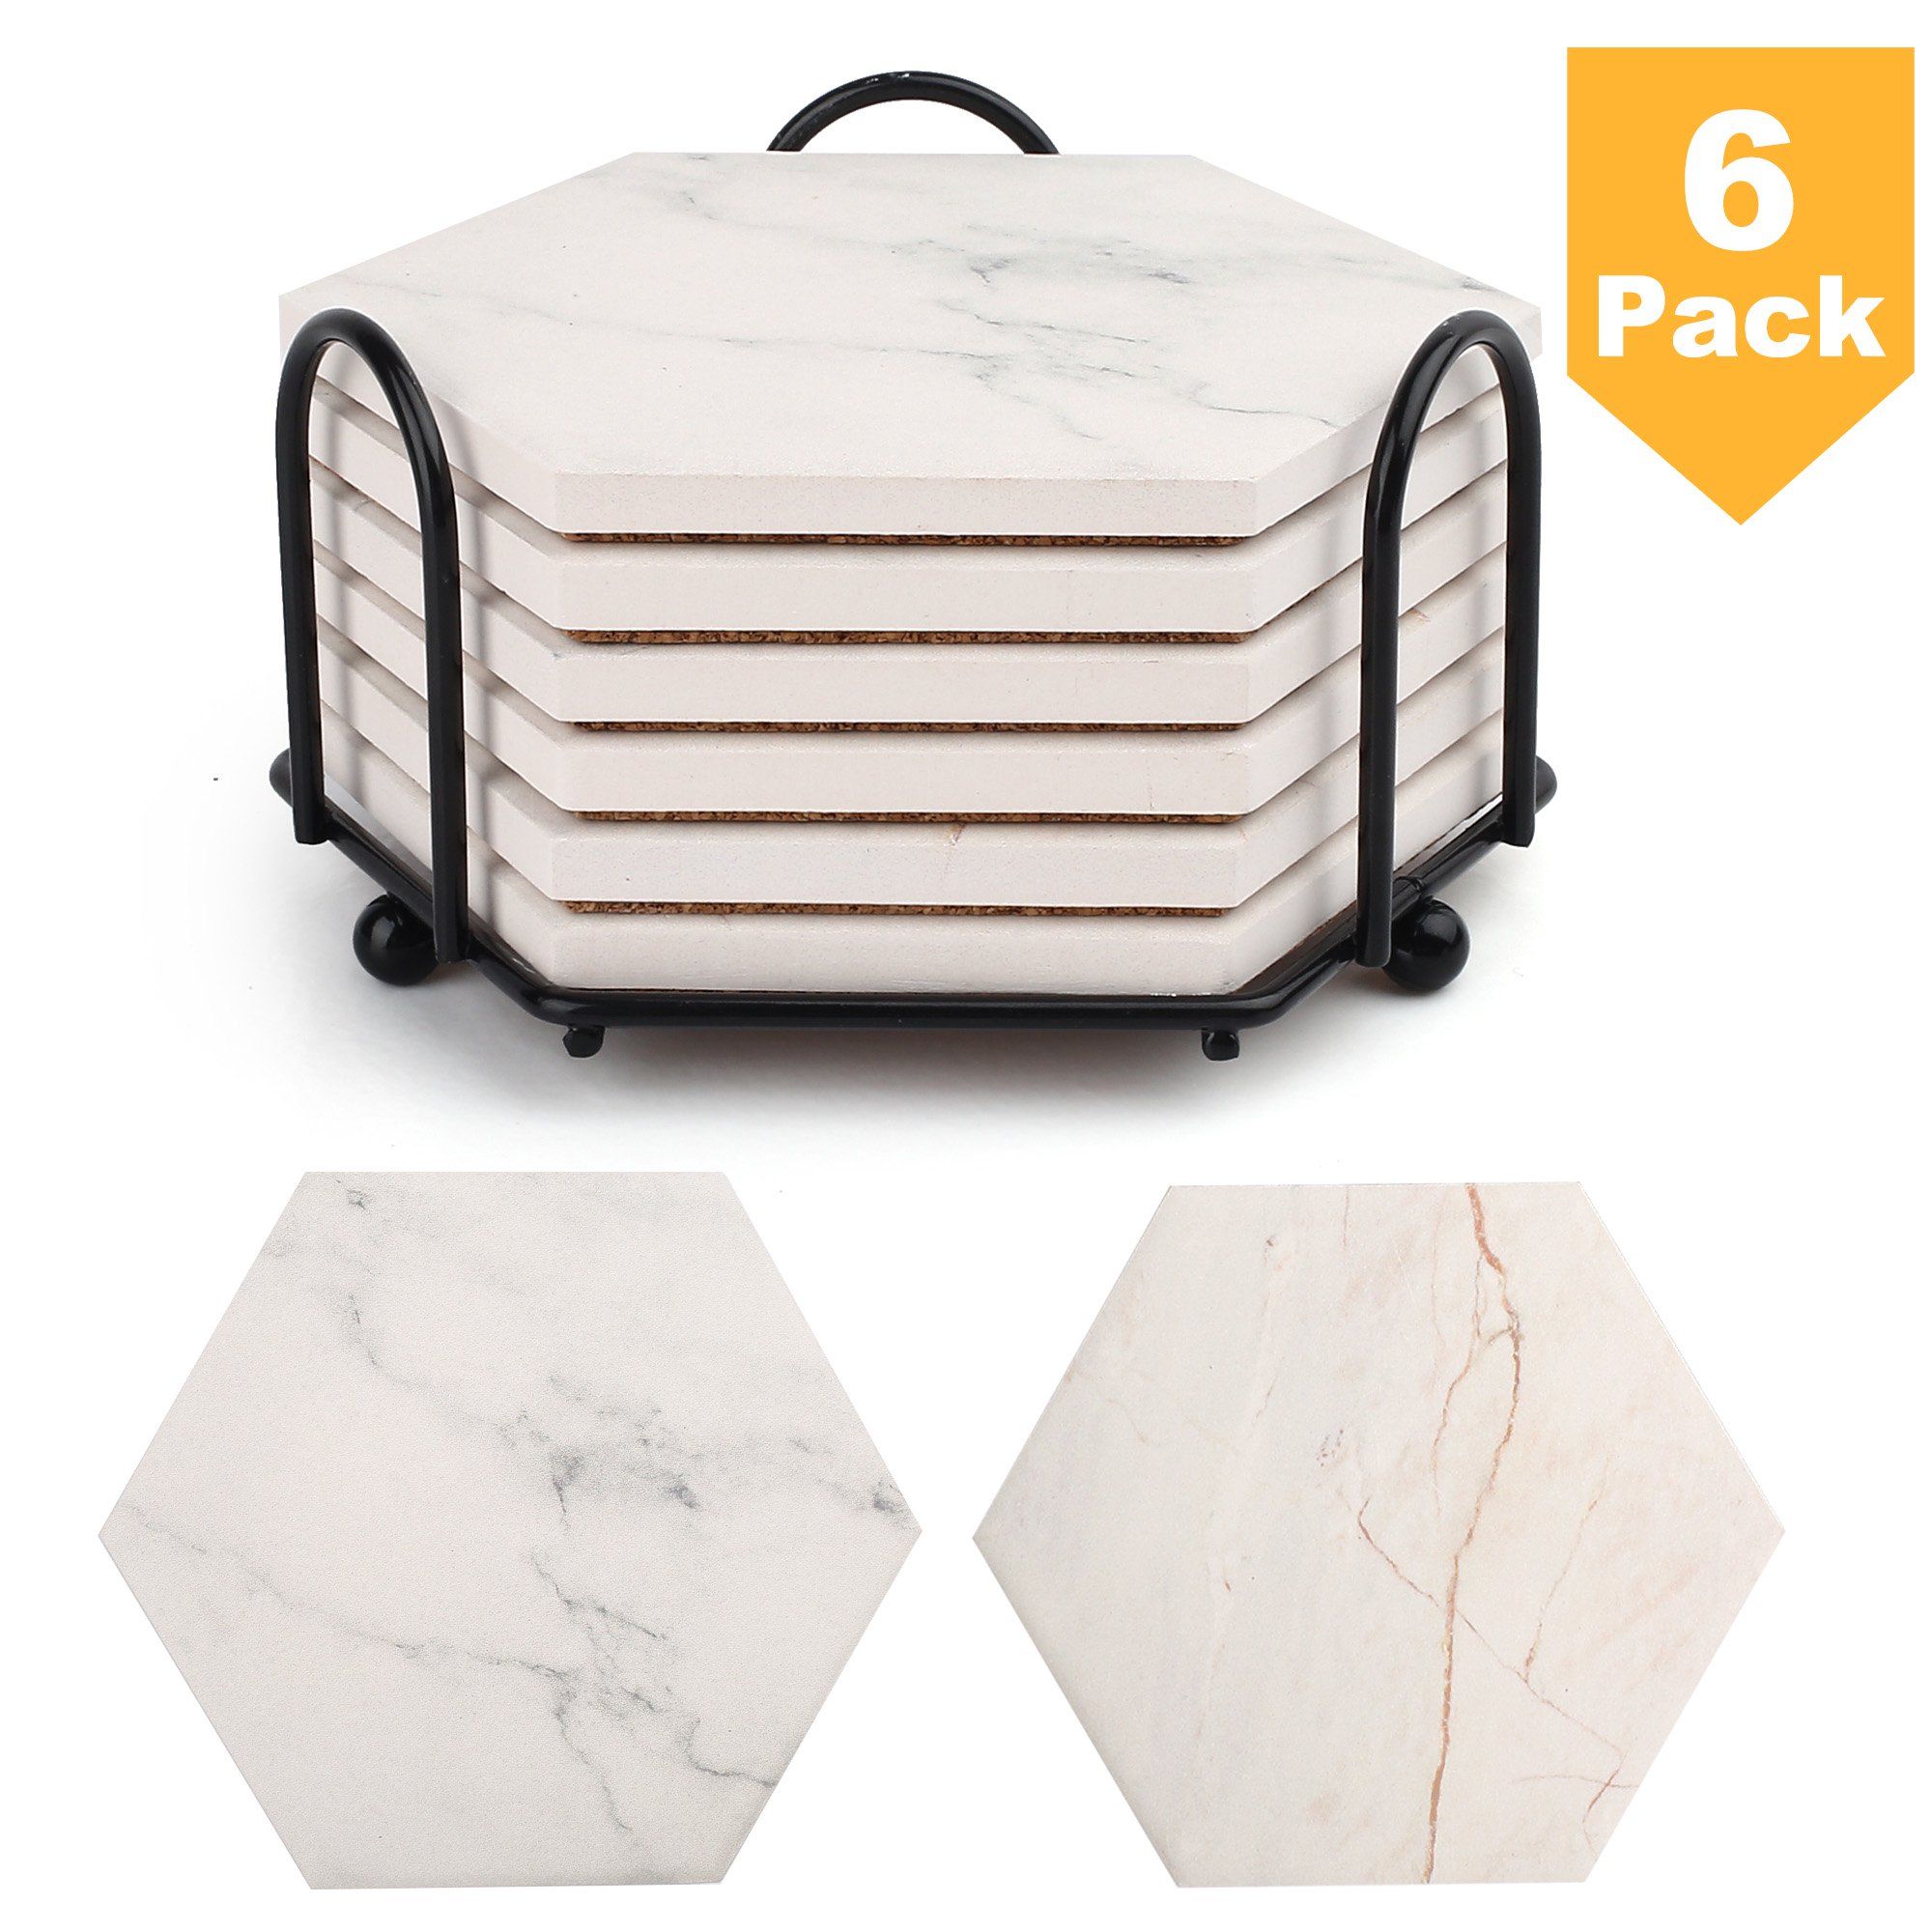 6PCS Drink Coasters, Marble Absorbent Coasters with Metal Holder, Non-Slip Cork Backing ,Ceramic ... | Walmart (US)